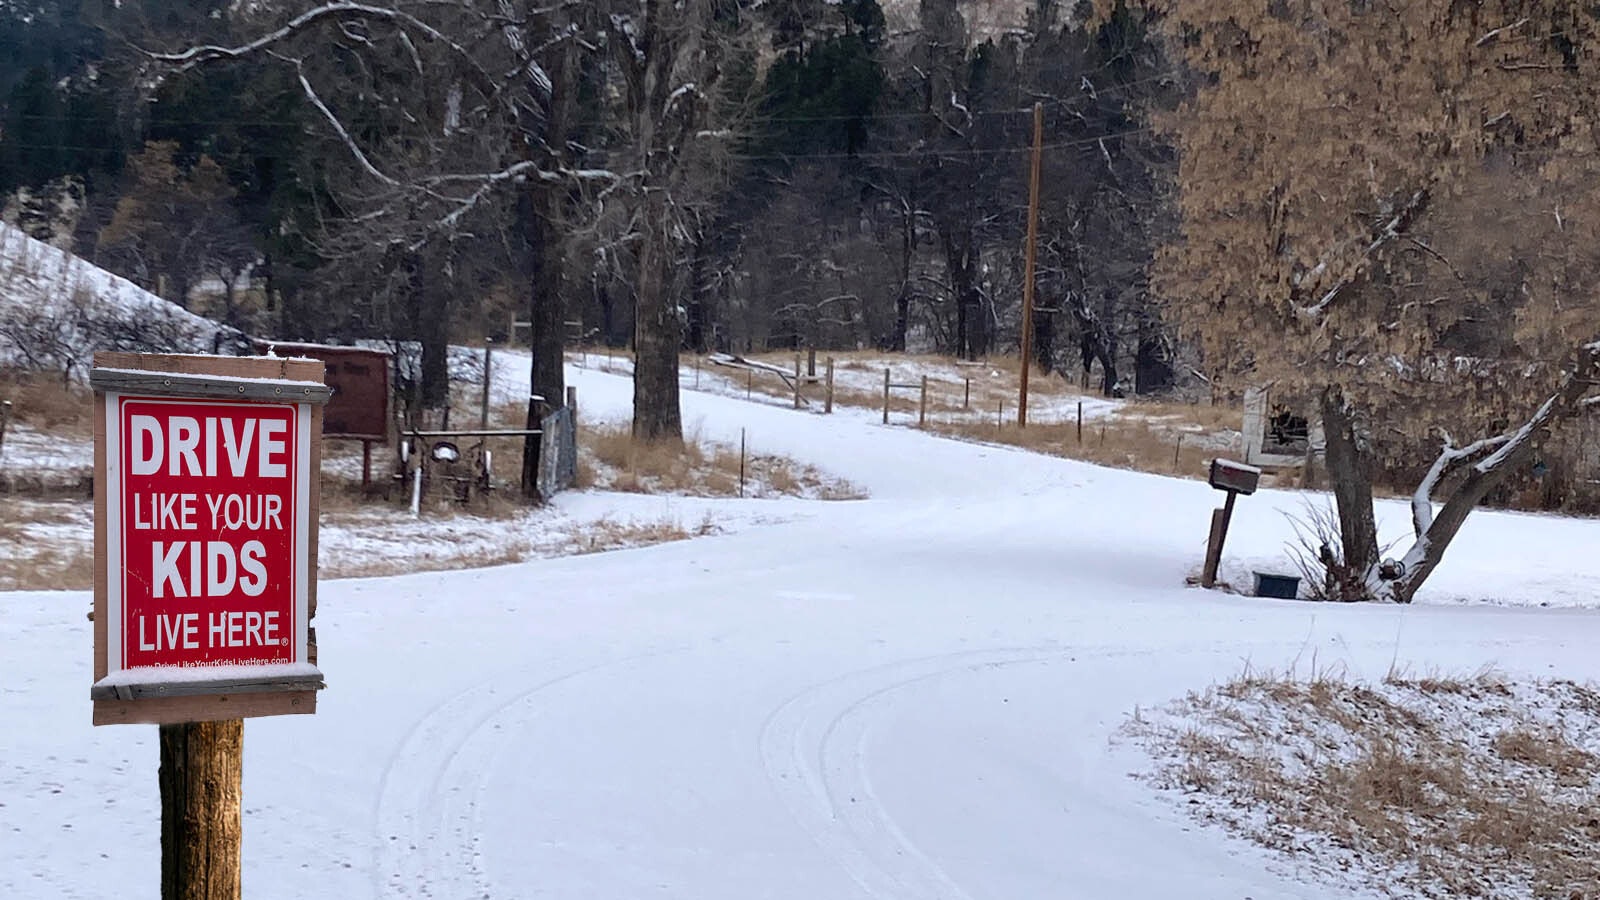 The roughly 12-mile Barlow Canyon Road is one of several Crook County roads on which some residents would like to see the state-mandated 55 mph speed limit lowered.